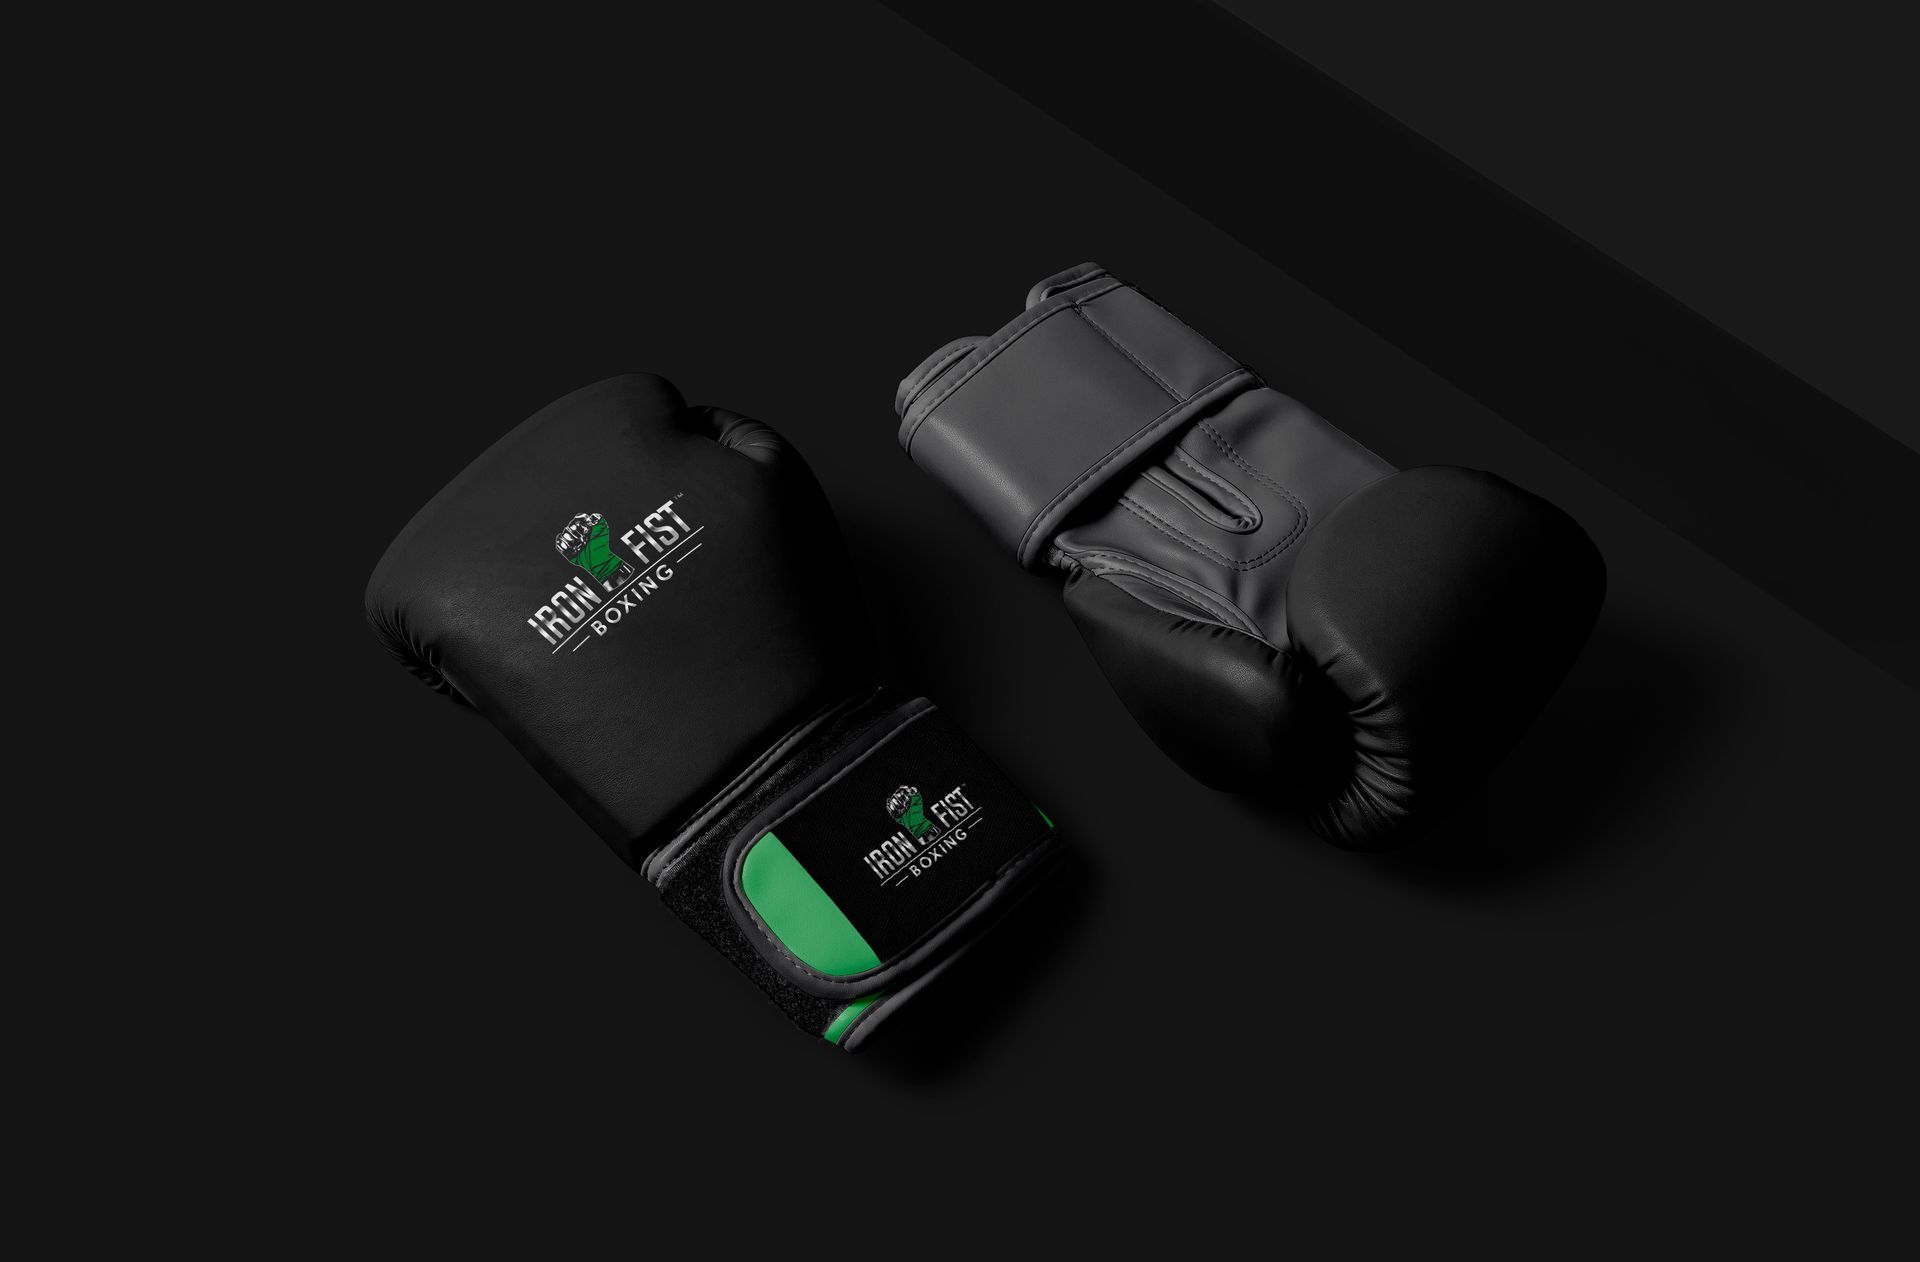 a pair of black boxing gloves with the Irron fist boxing logo printed are sitting on a black surface